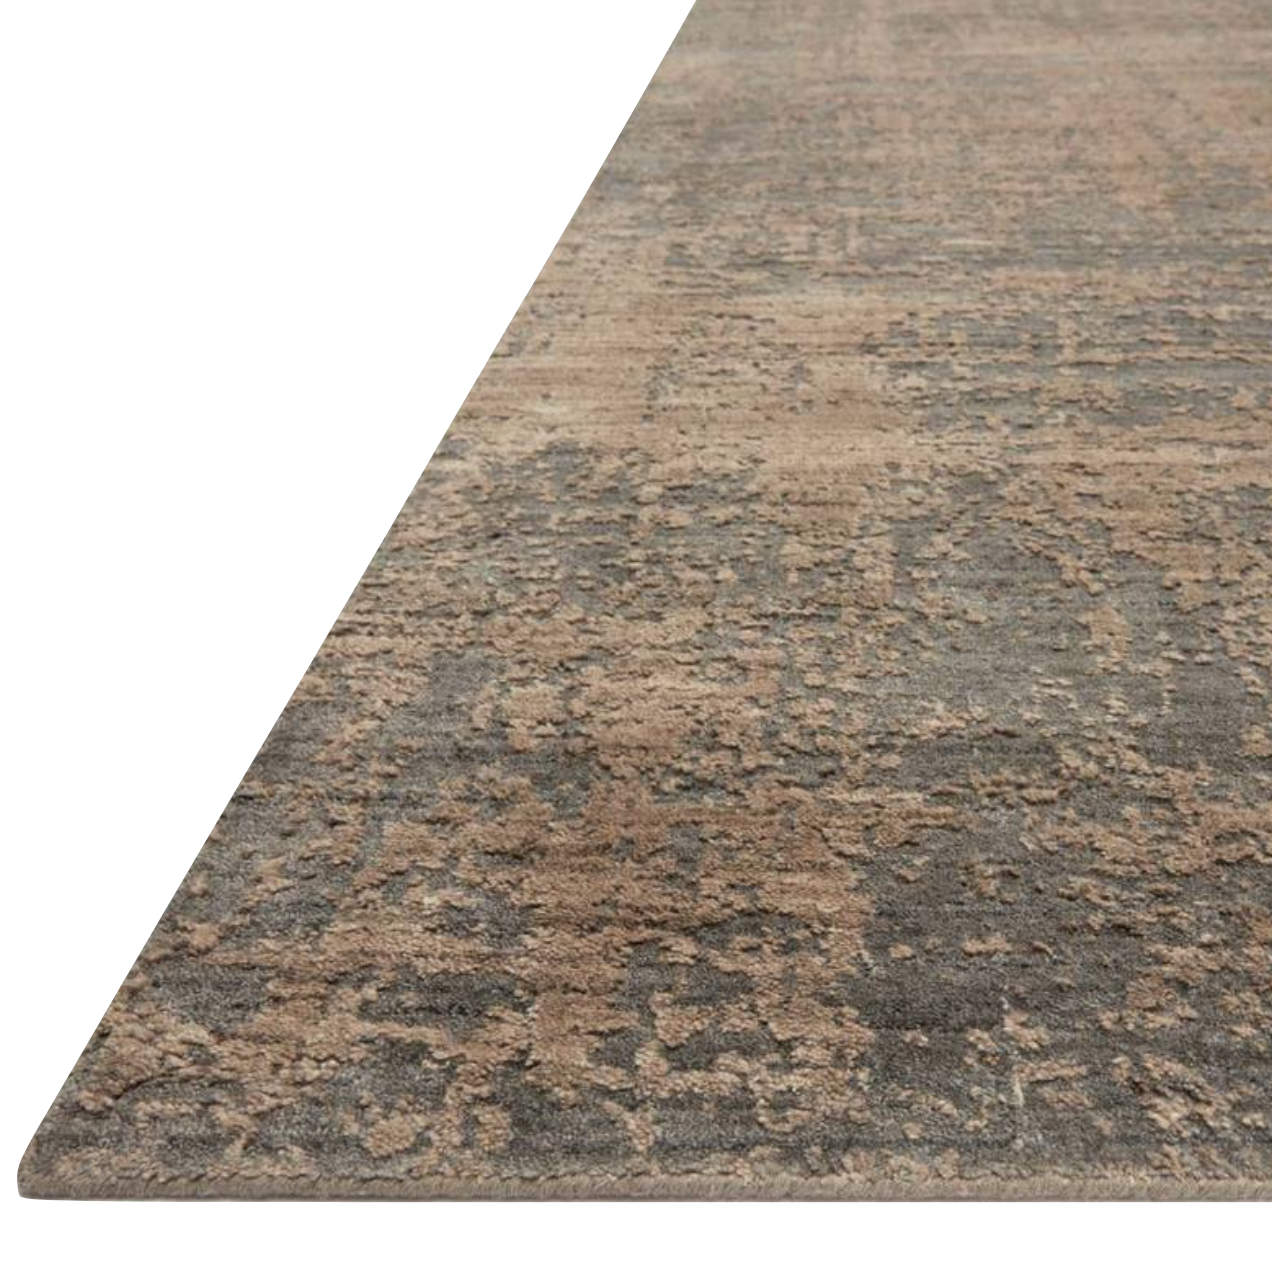 Hand-loomed of viscose and wool by skilled artisans in India, the Arlo Charcoal / Taupe Area Rug showcases linear yet organic designs, creating a beautiful pattern with unique undulating texture. A beautiful choice for your entryway, living room, or other high traffic area.   Hand Loomed 88% Viscose | 12% Wool Pile ARL-03 Charcoal/Taupe